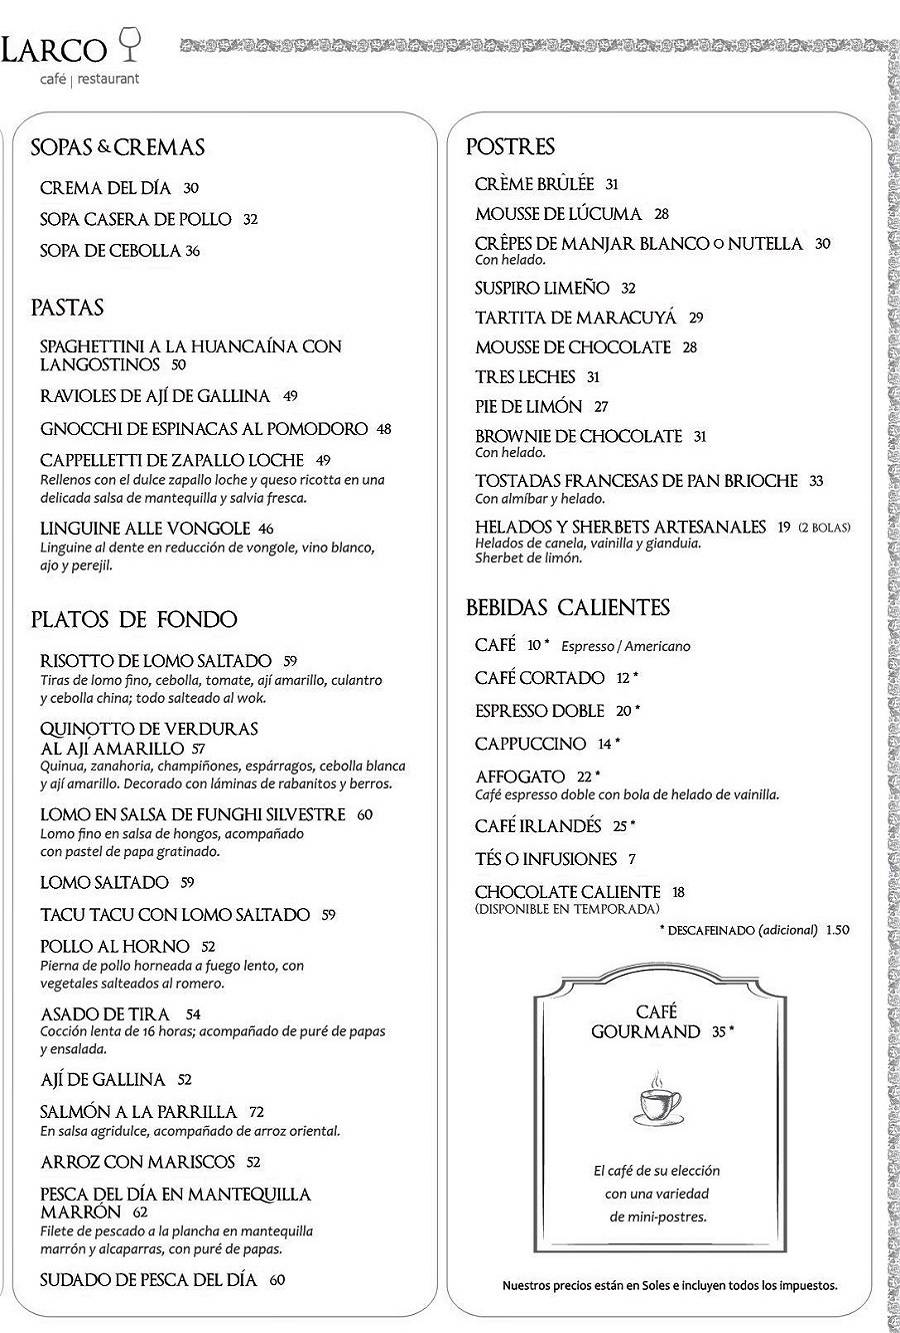 Museo Larco Restaurant Menu with Prices p2